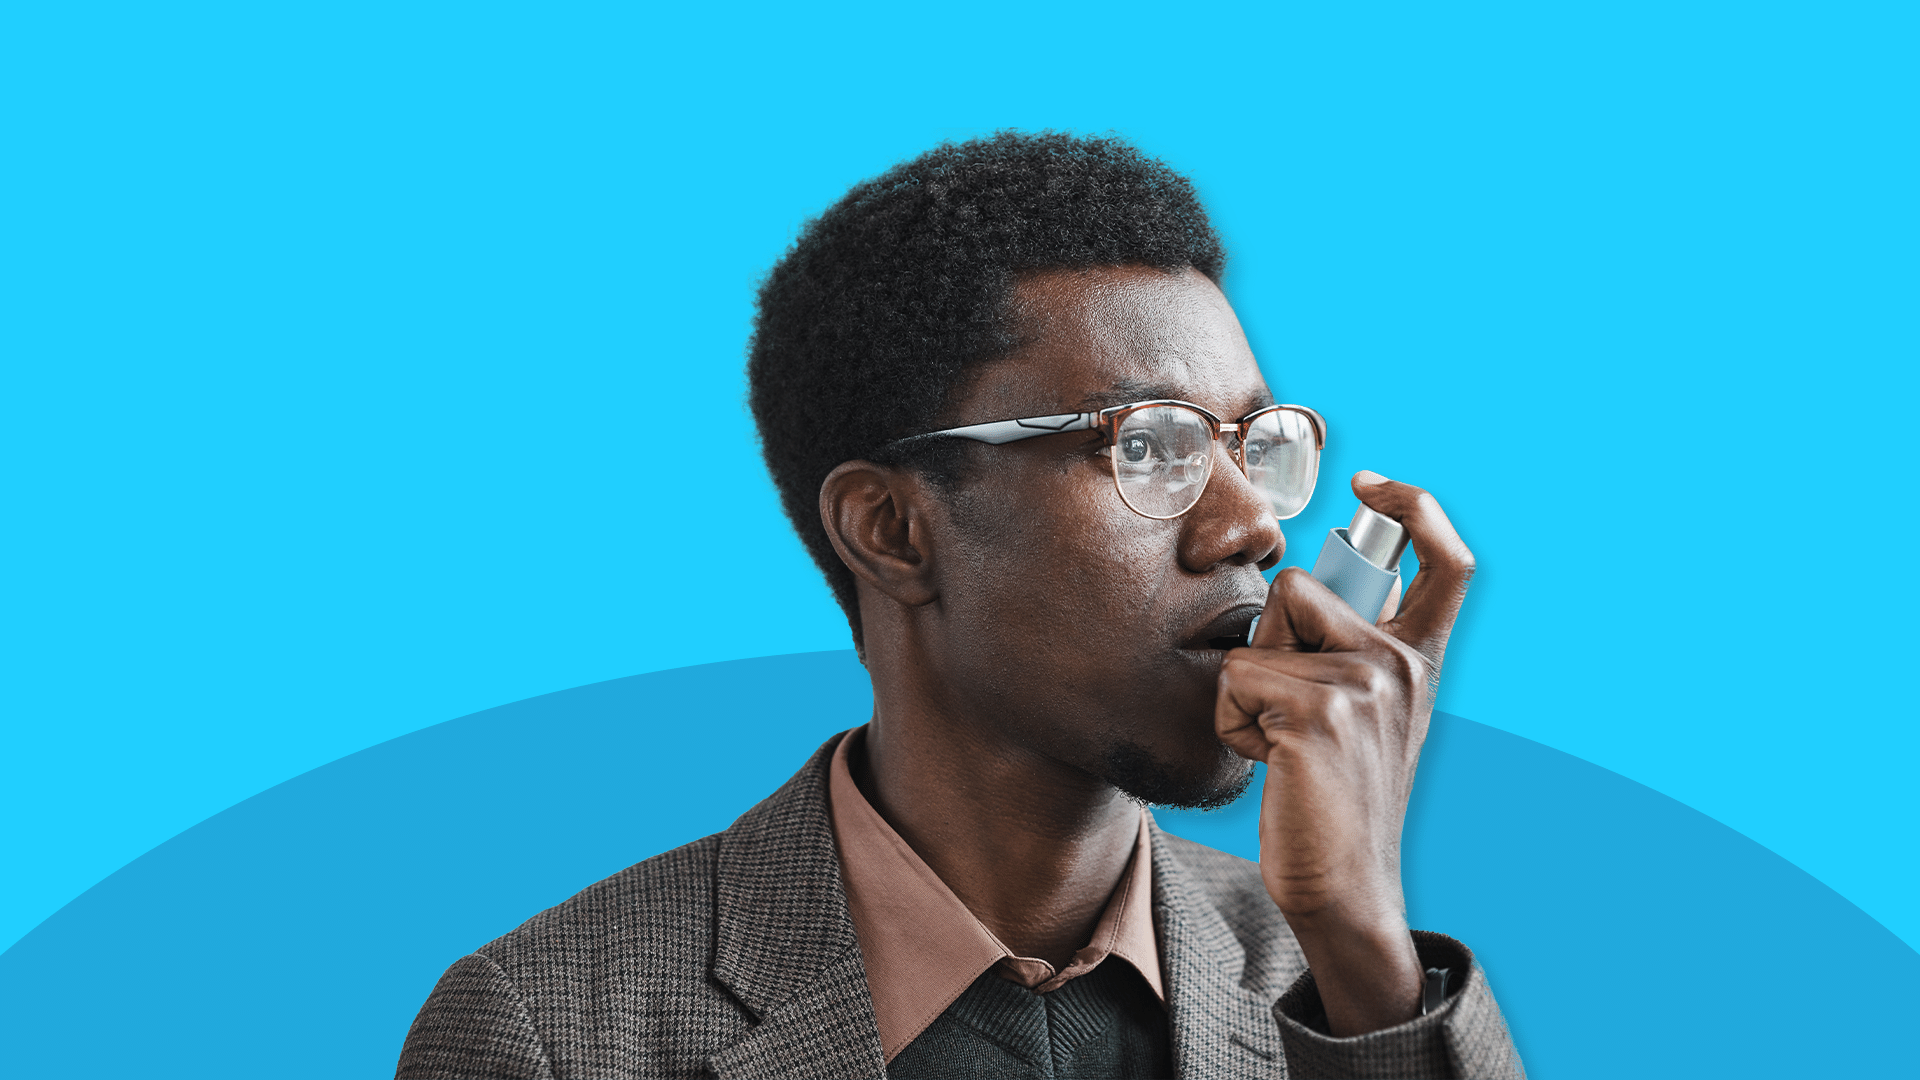 A man with an inhaler represents asthma facts and statistics